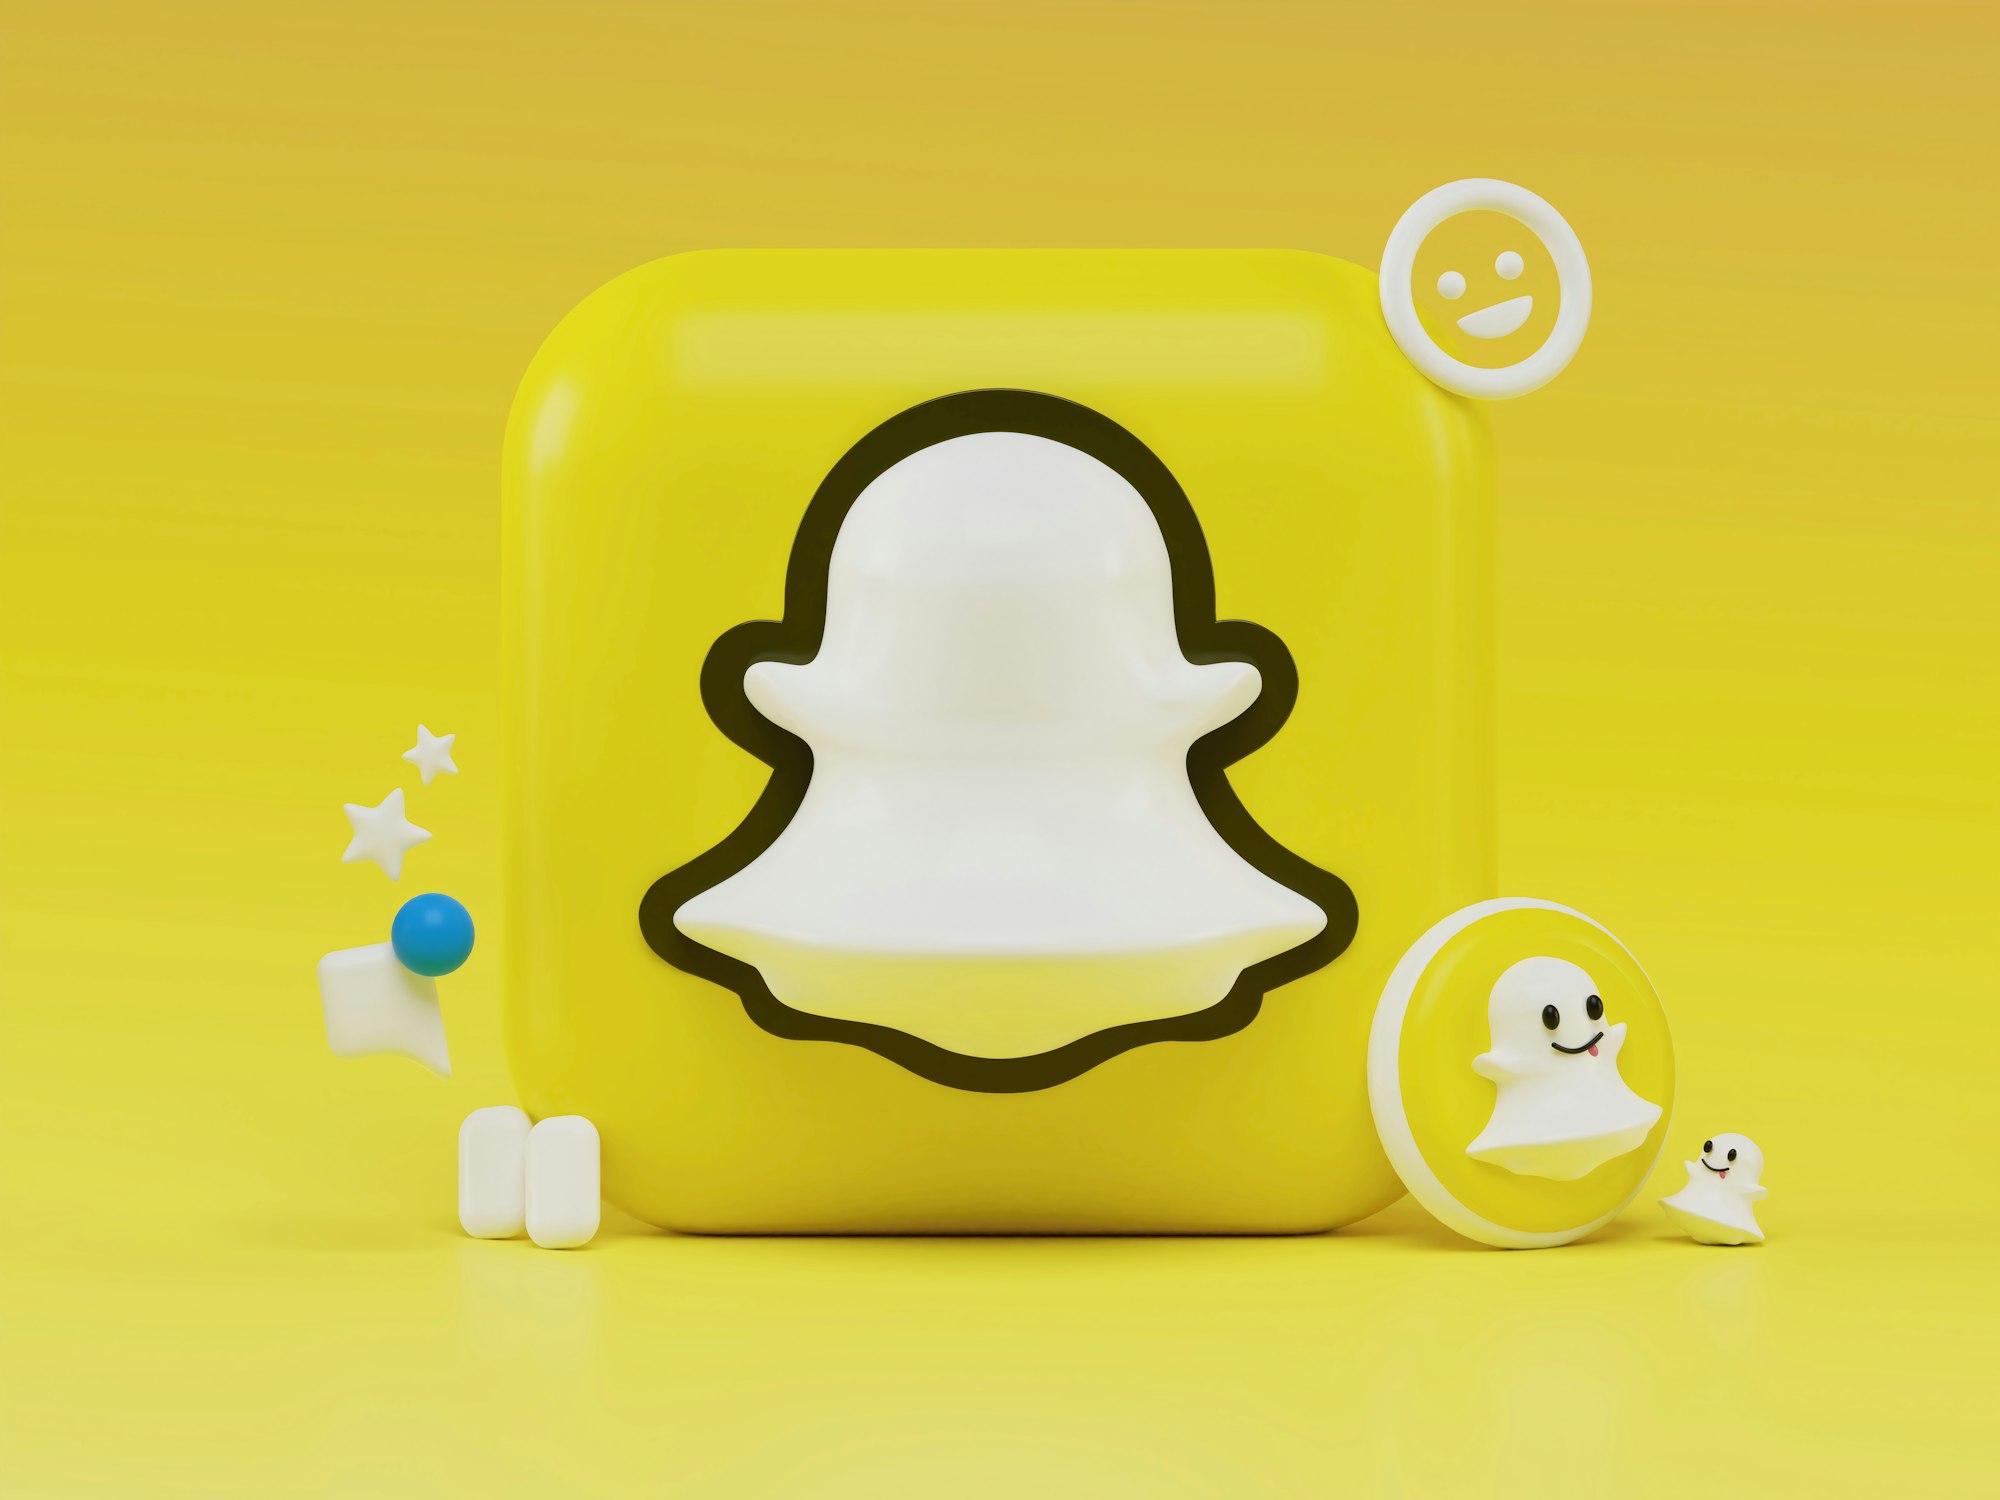 Snapchat Stock  Posts Profit For First Time-Soars 58%